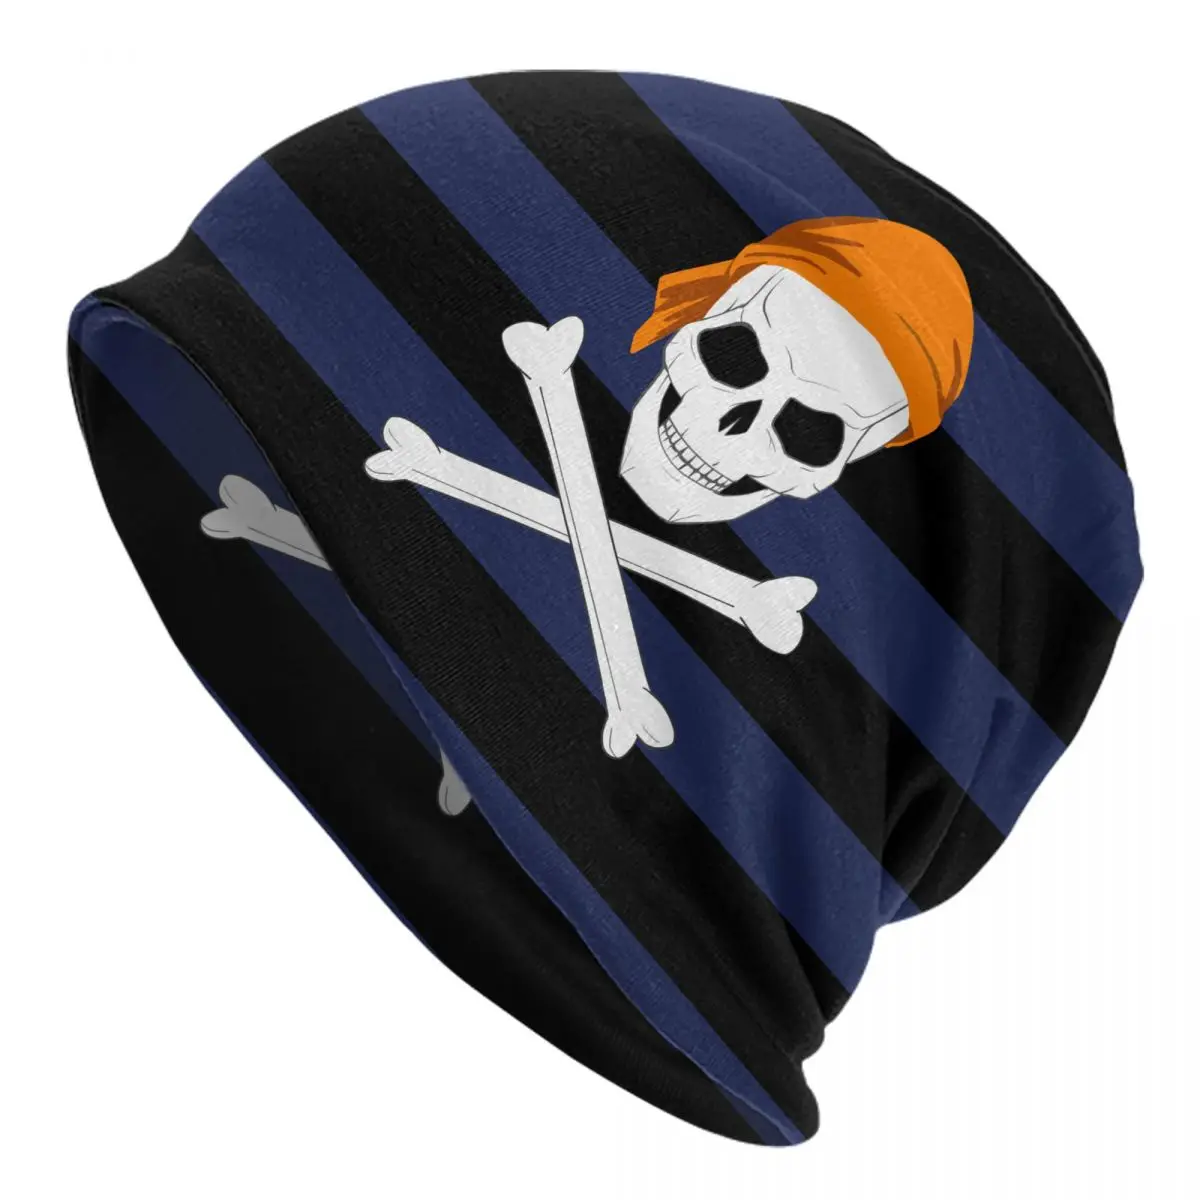 Pirate Adult Men's Women's Knit Hat Keep warm winter knitted hat